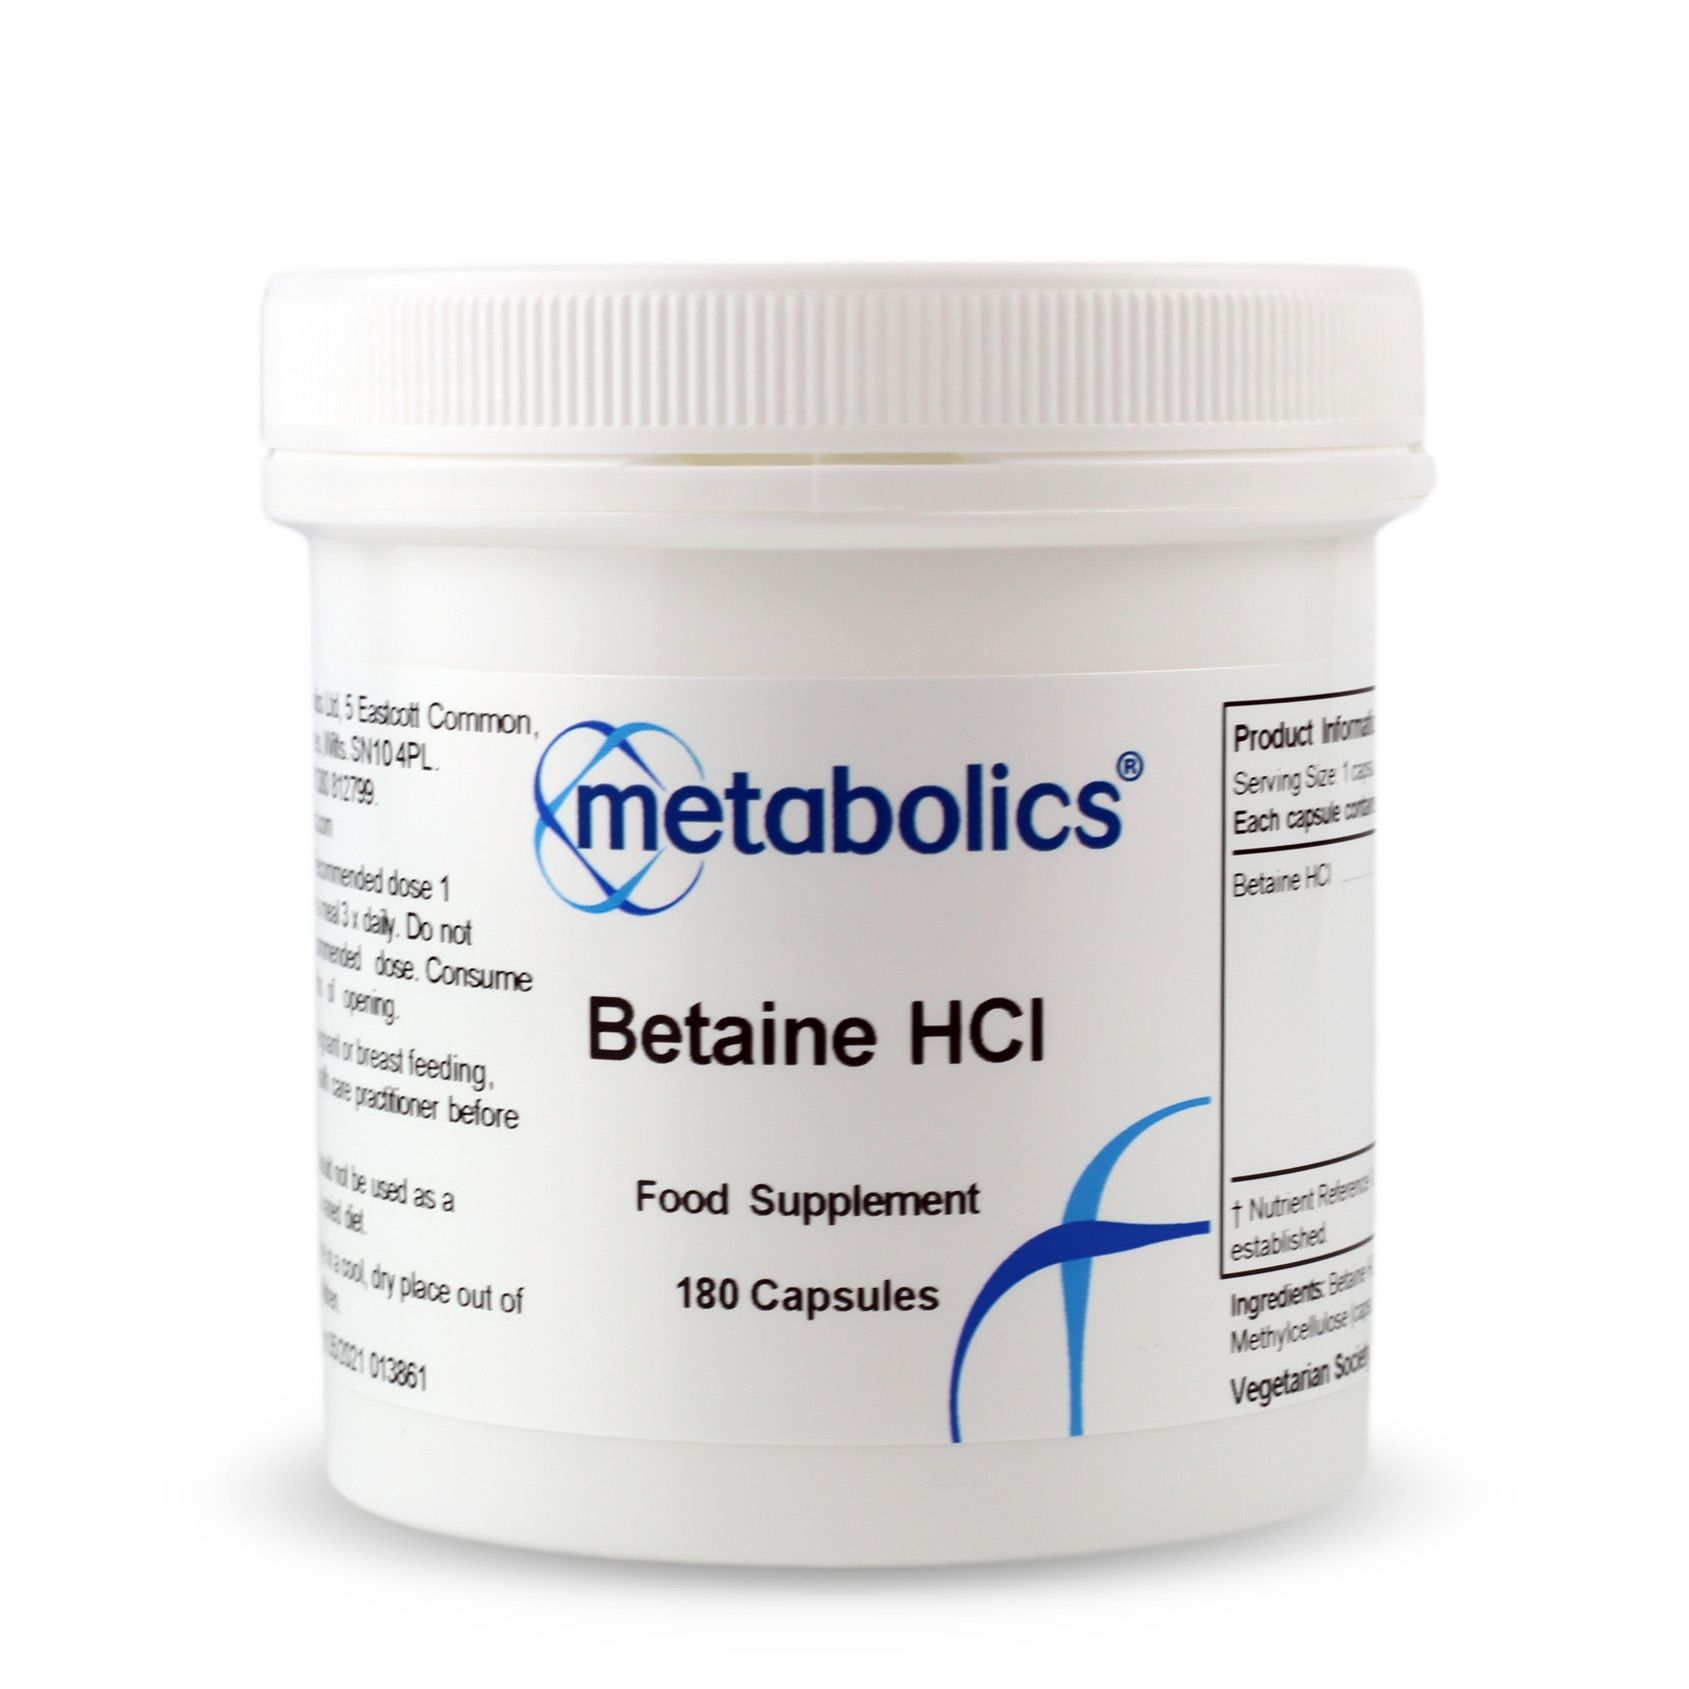 Betaine HCl (Pot of 180 capsules)